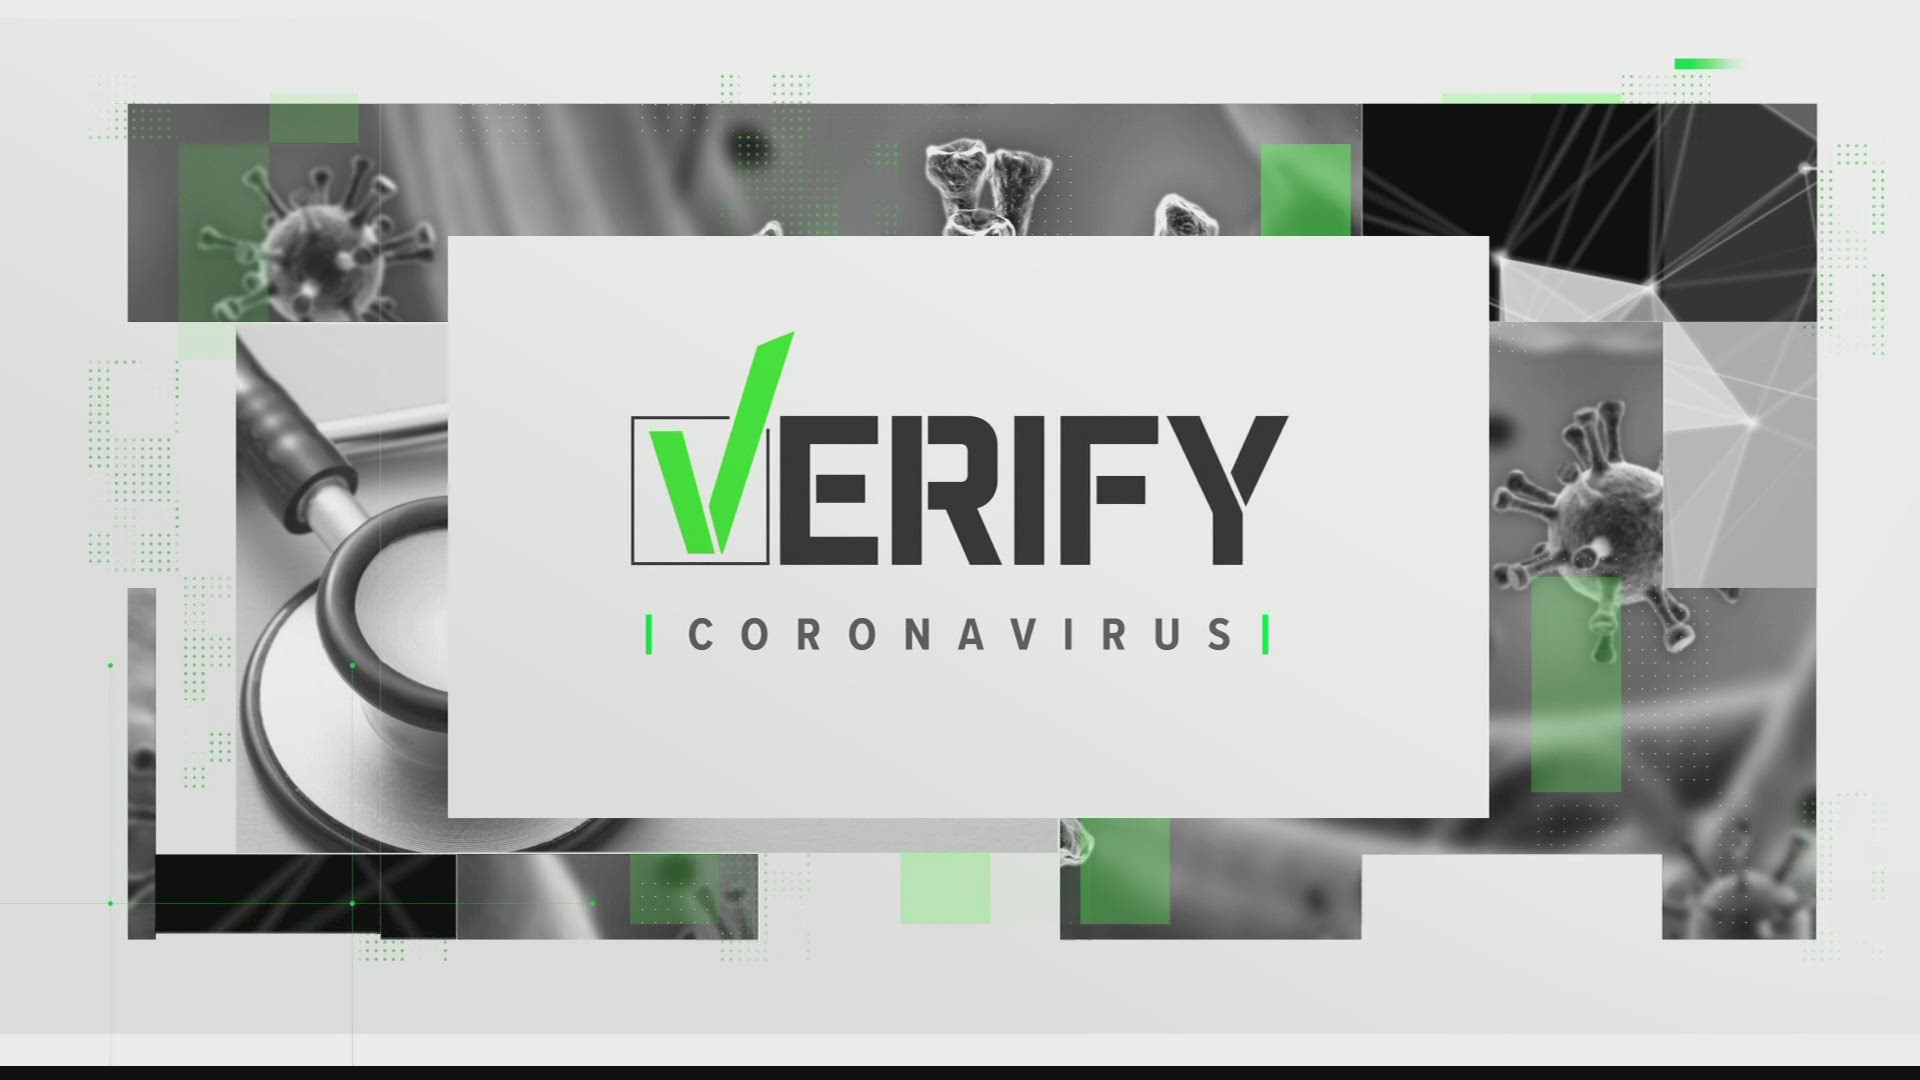 The VERIFY team looked into false claims that a coronavirus vaccine could give you the virus.